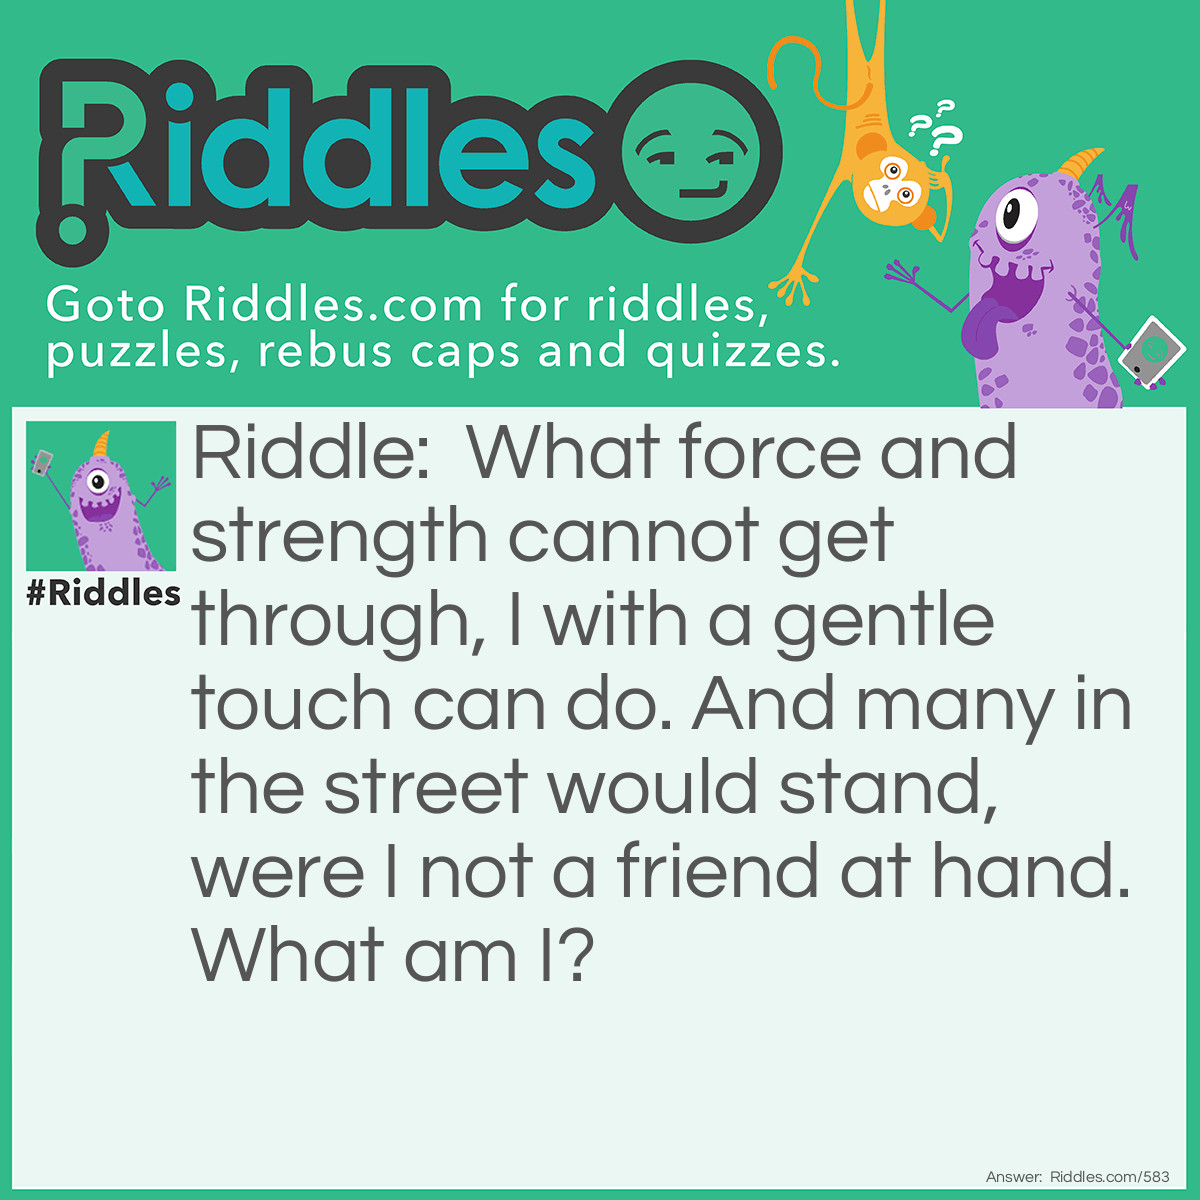 Riddle: What force and strength cannot get through, I with a gentle touch can do. And many in the street would stand, were I not a friend at hand.
What am I? Answer: I am a Key.